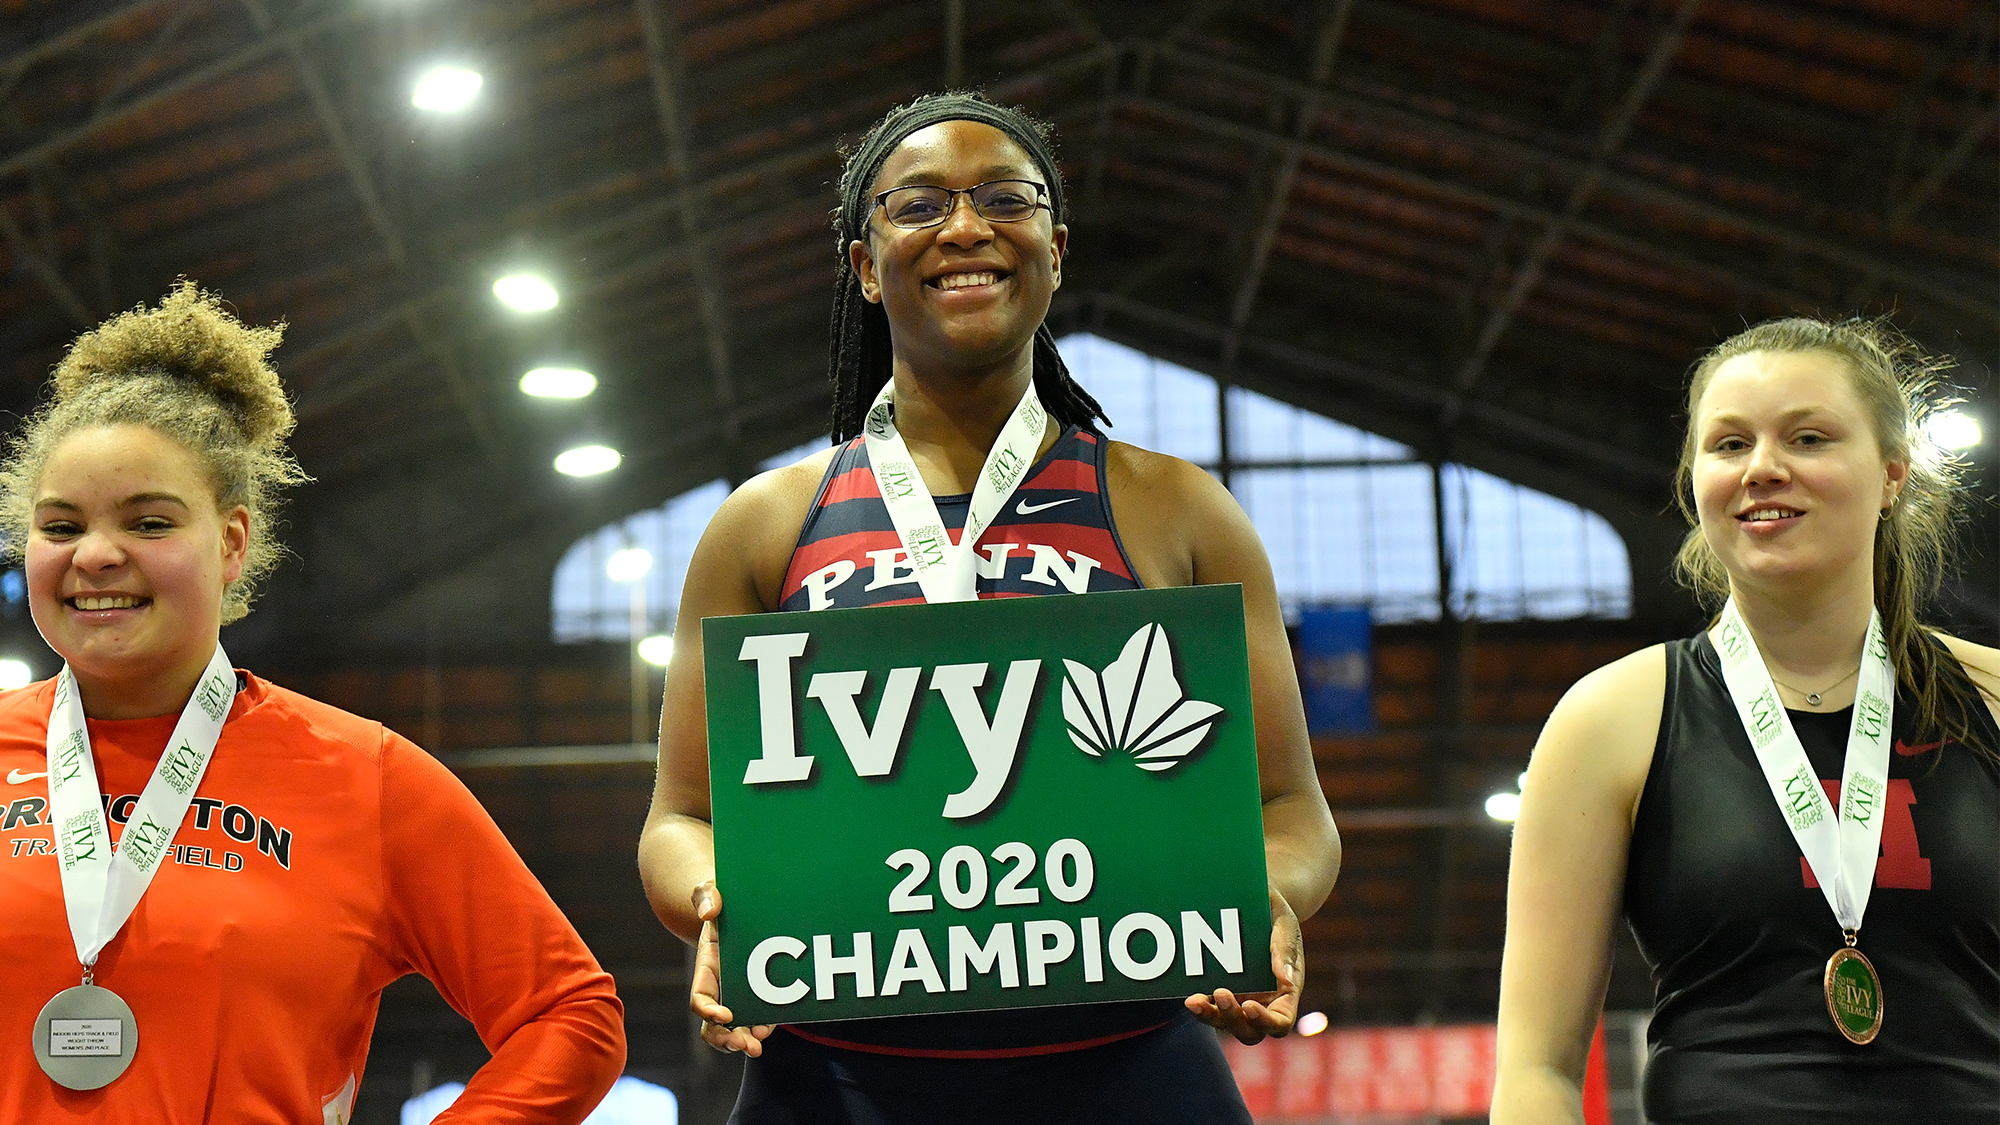 Mayyi Mahama stands on the first place podium at the 2020 Indoor Ivy Heps, holding a first place board.